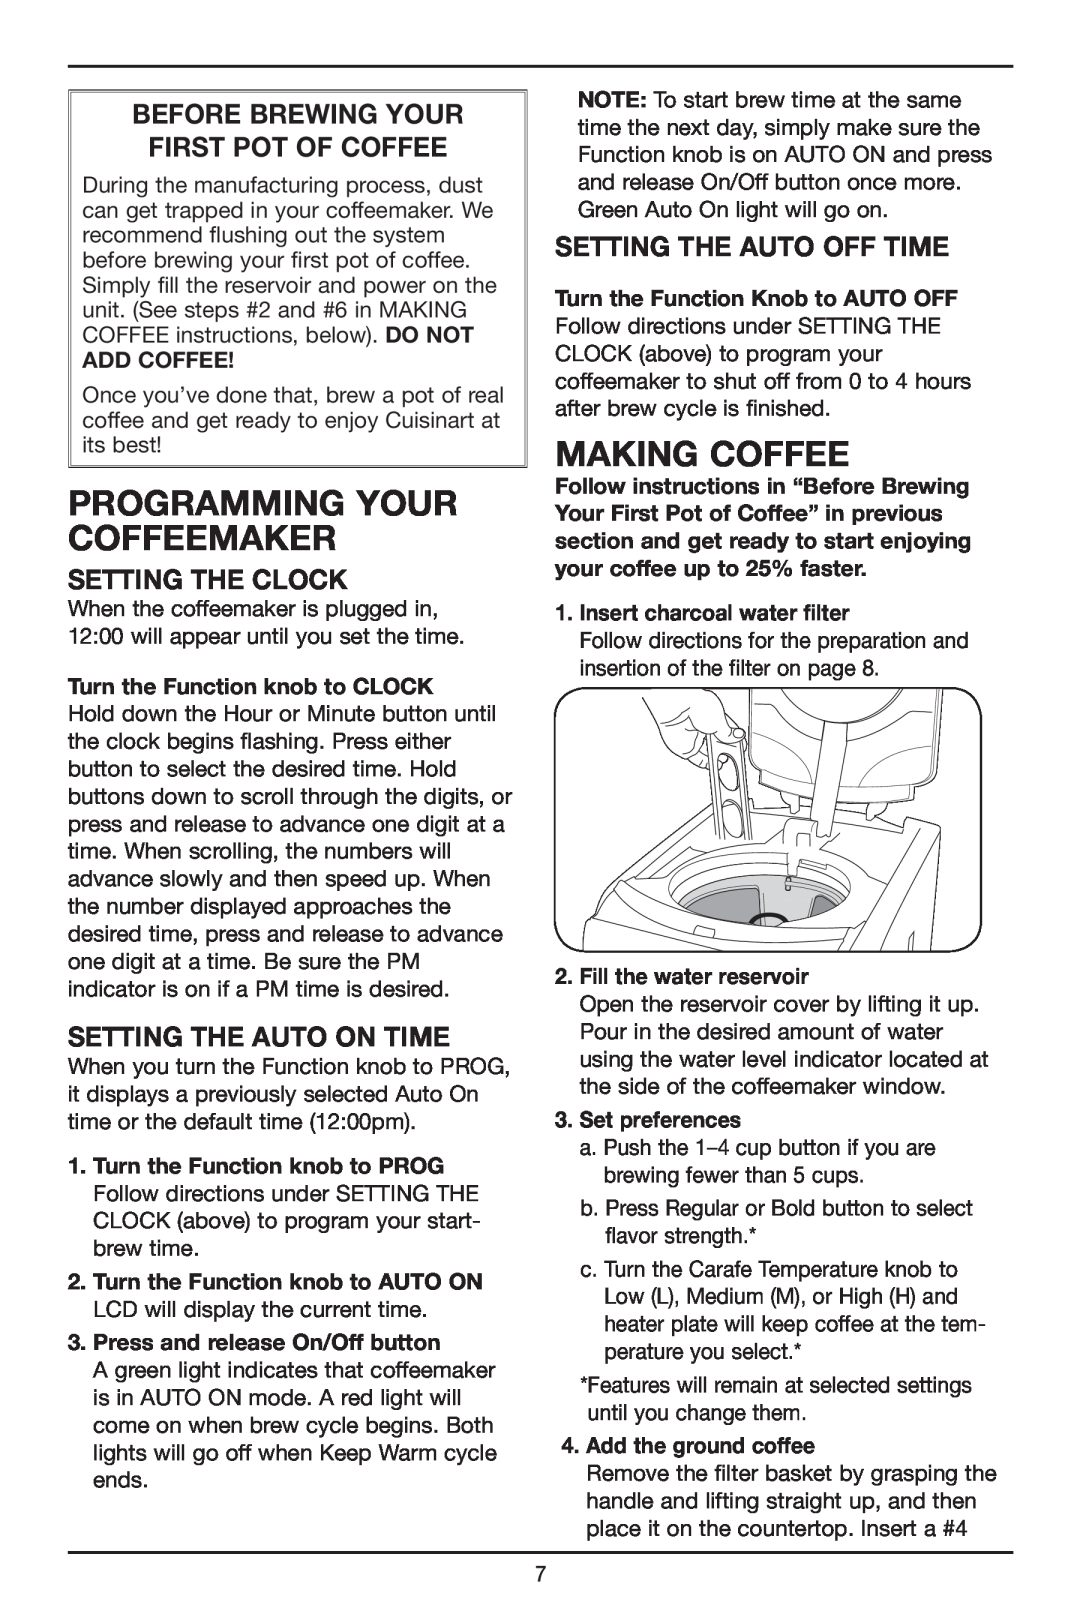 Cuisinart DCC-2650 Programming Your Coffeemaker, Making Coffee, Before Brewing Your First Pot Of Coffee, Setting the Clock 